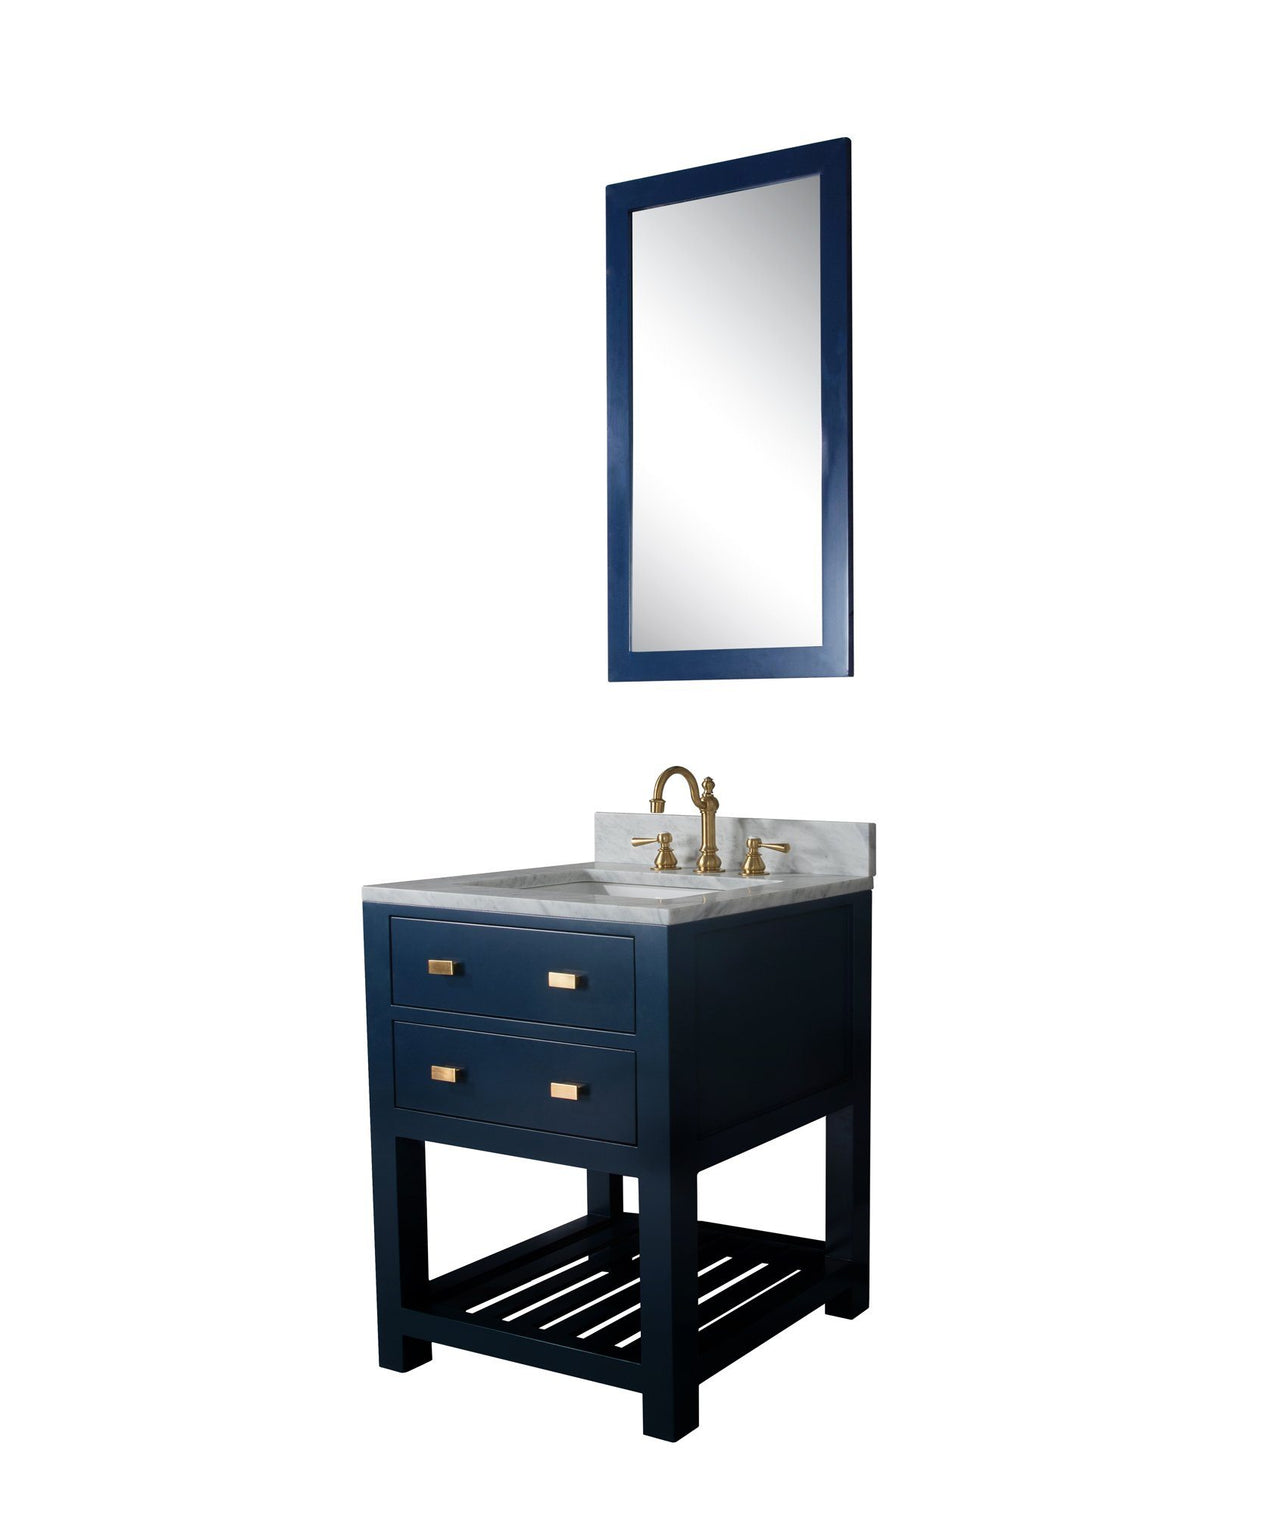 24 Inch Monarch Blue Single Sink Bathroom Vanity With F2-0012 Satin Brass Faucet And Mirror From The Madalyn Collection Vanity Water Creation 